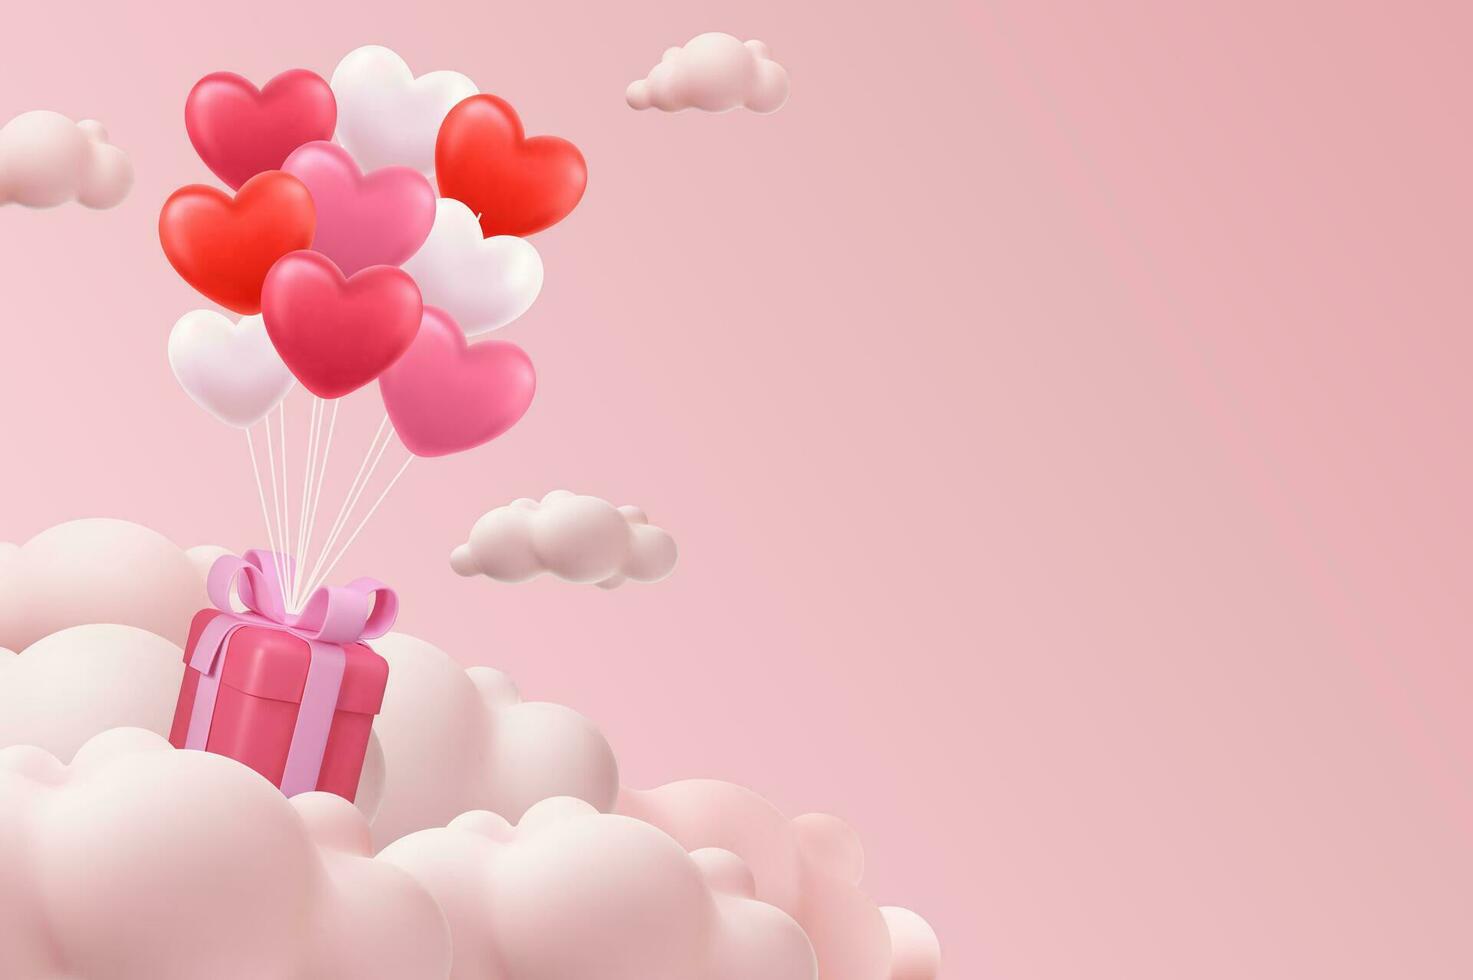 Valentine s day concept. 3D heart hot air flying with gift box on cloud background. Love concept for happy mother s day, valentine s day, birthday day. Vector illustration